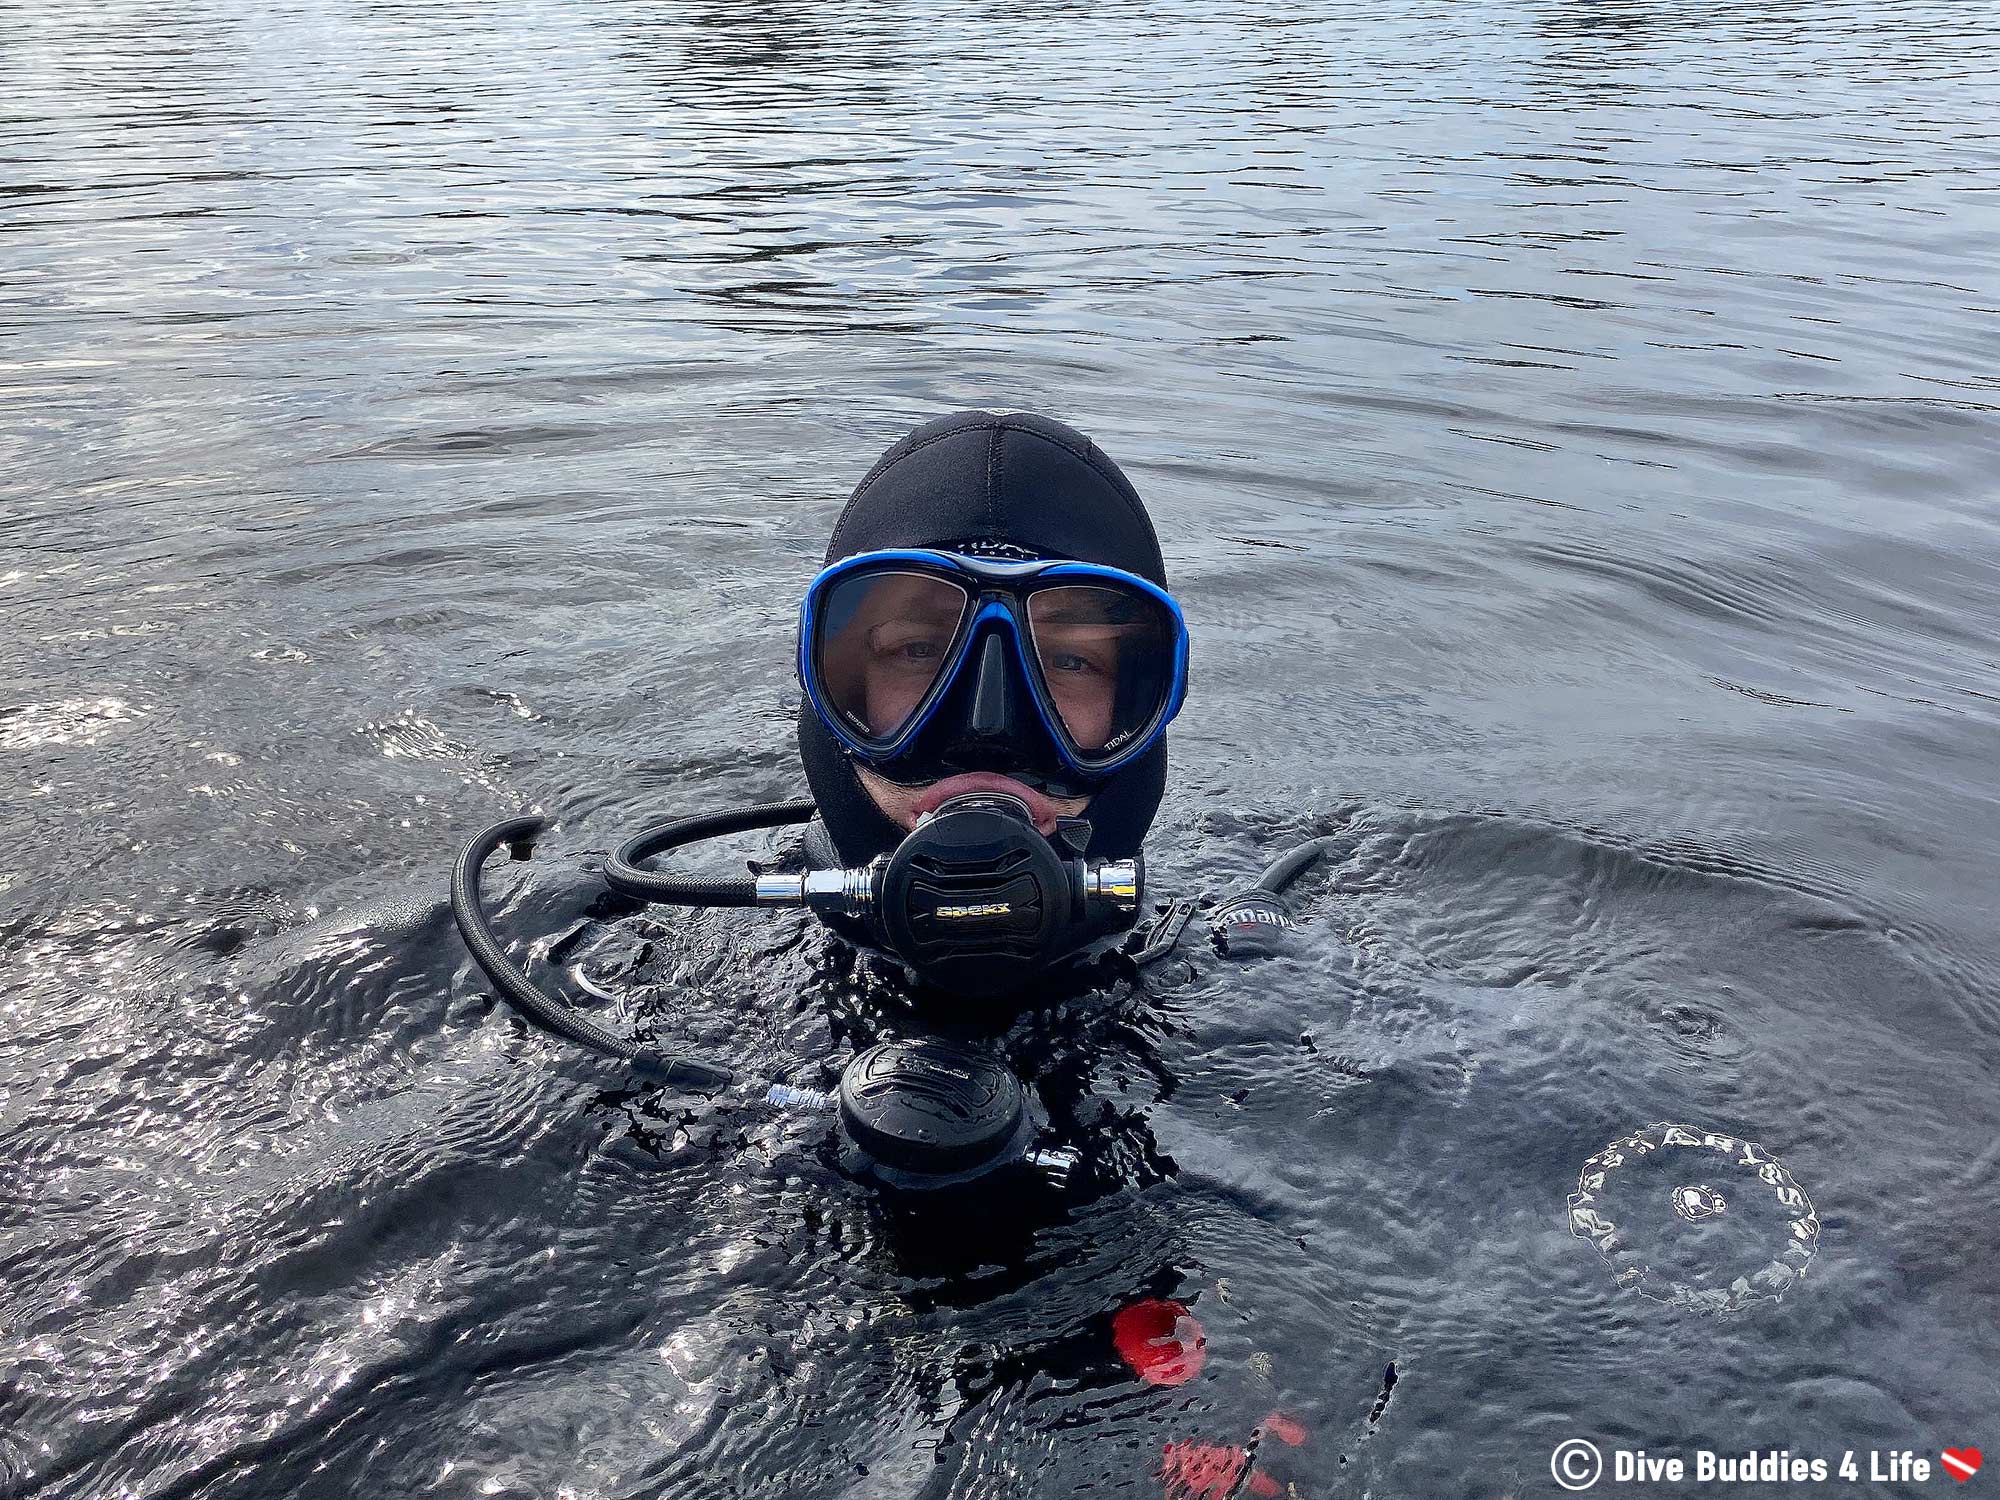 Joey Scuba Diving in the Water with His ProShot Tidal Mask in Ontario